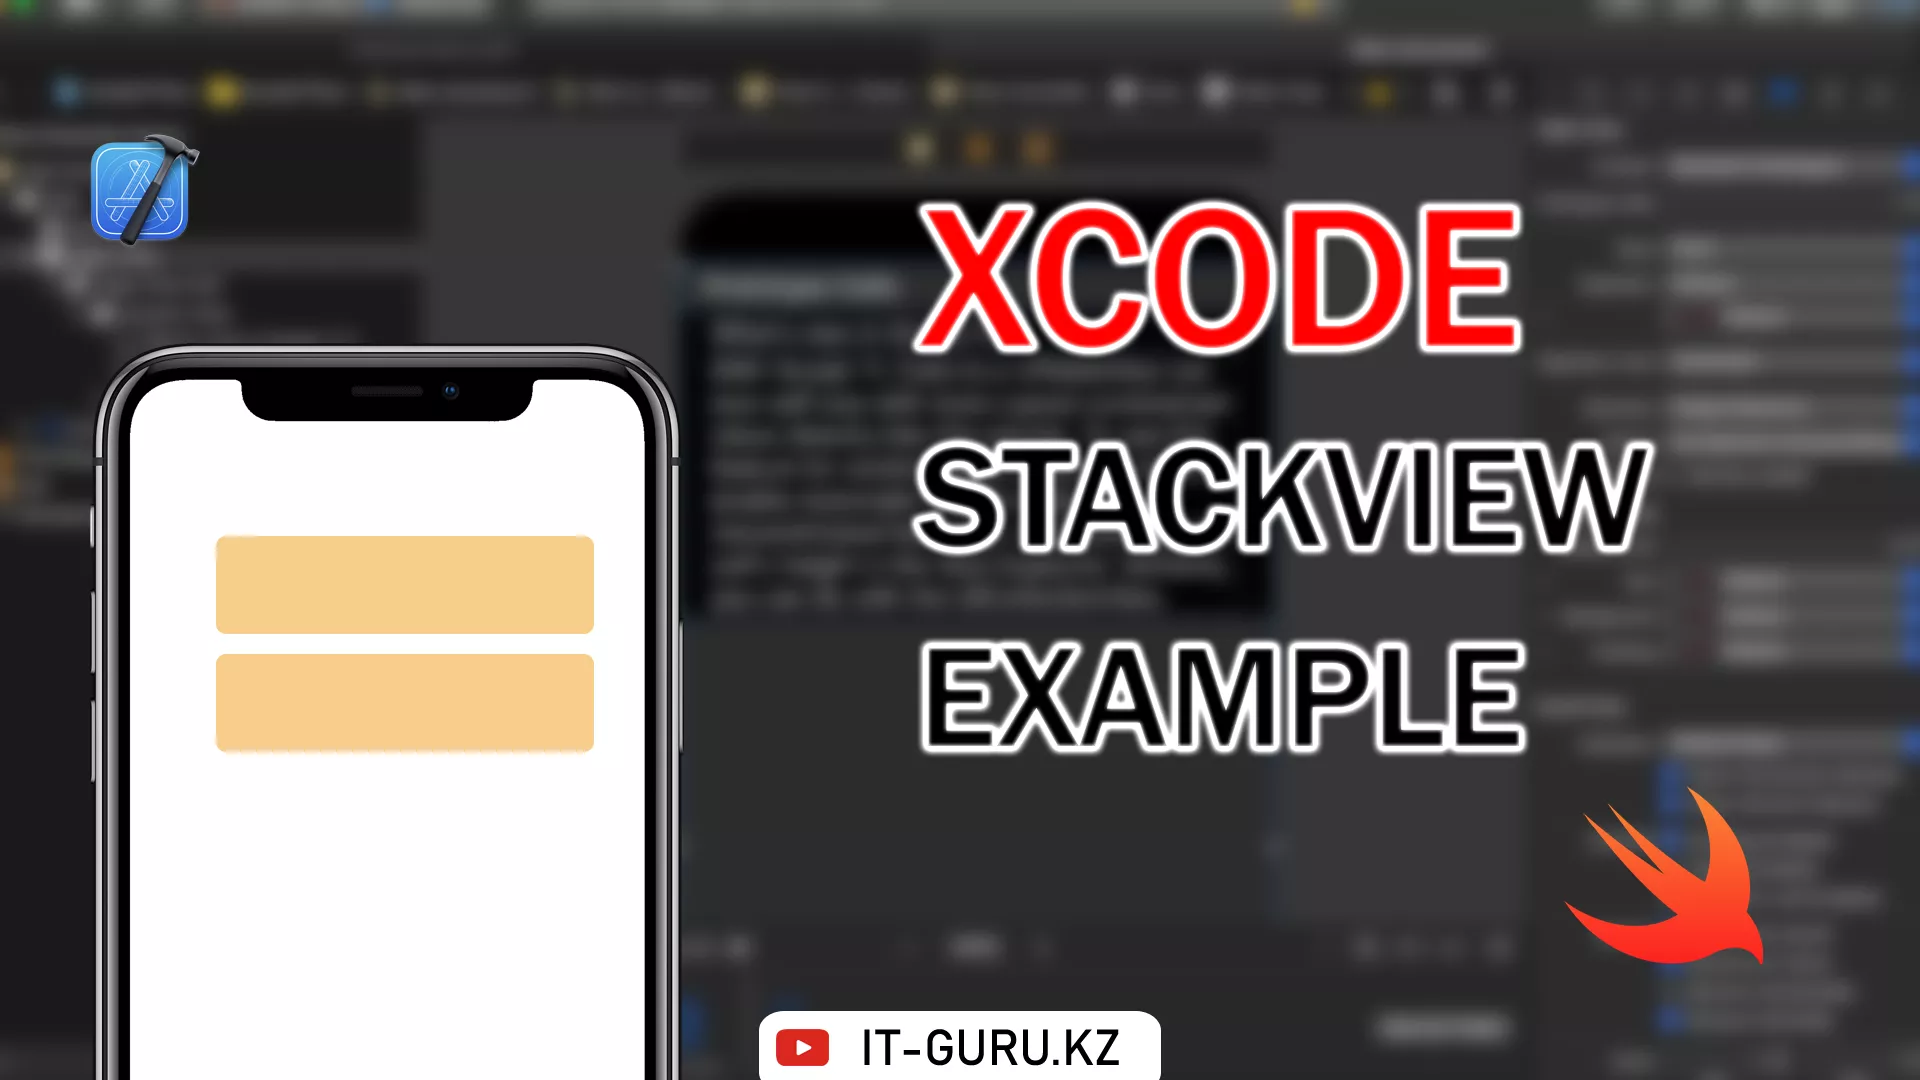 StackView example in Xcode